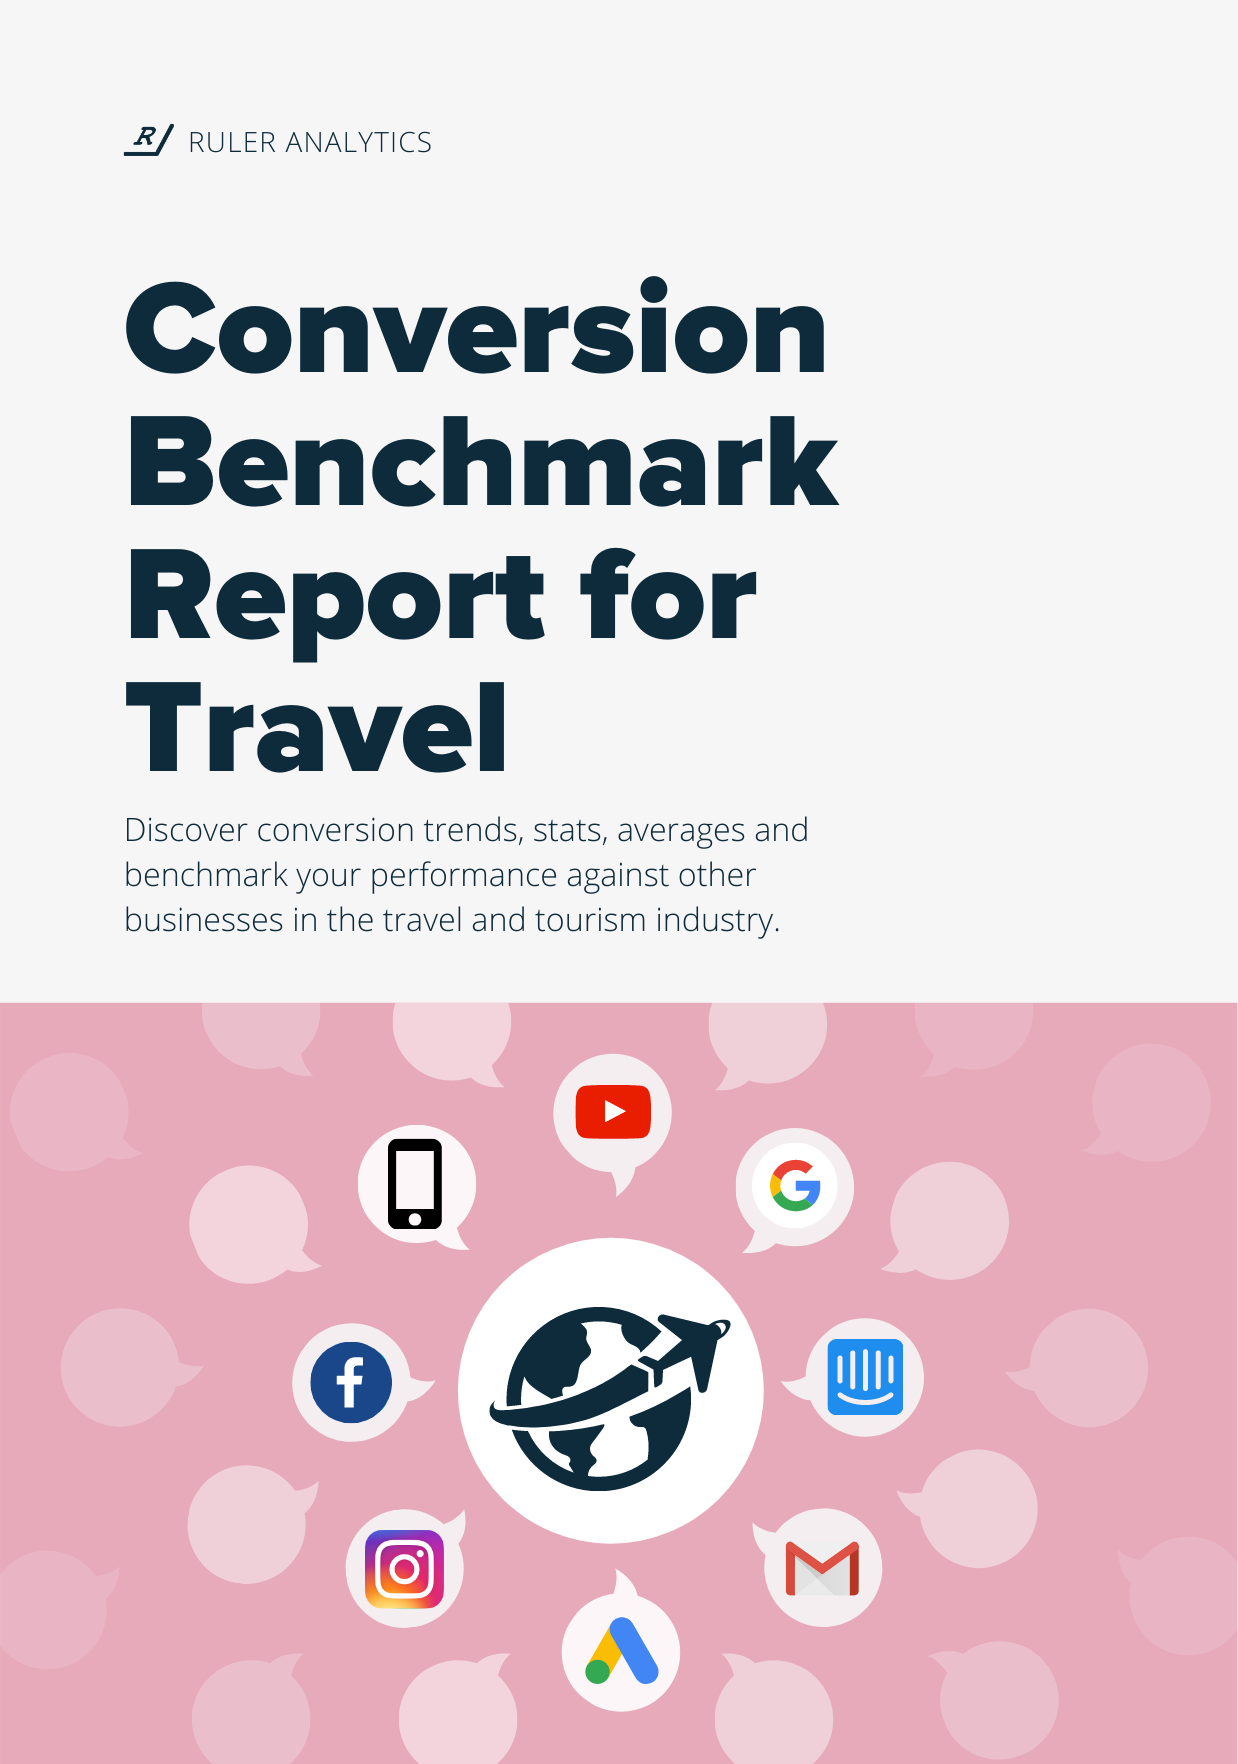 Conversion Benchmark Report for Travel